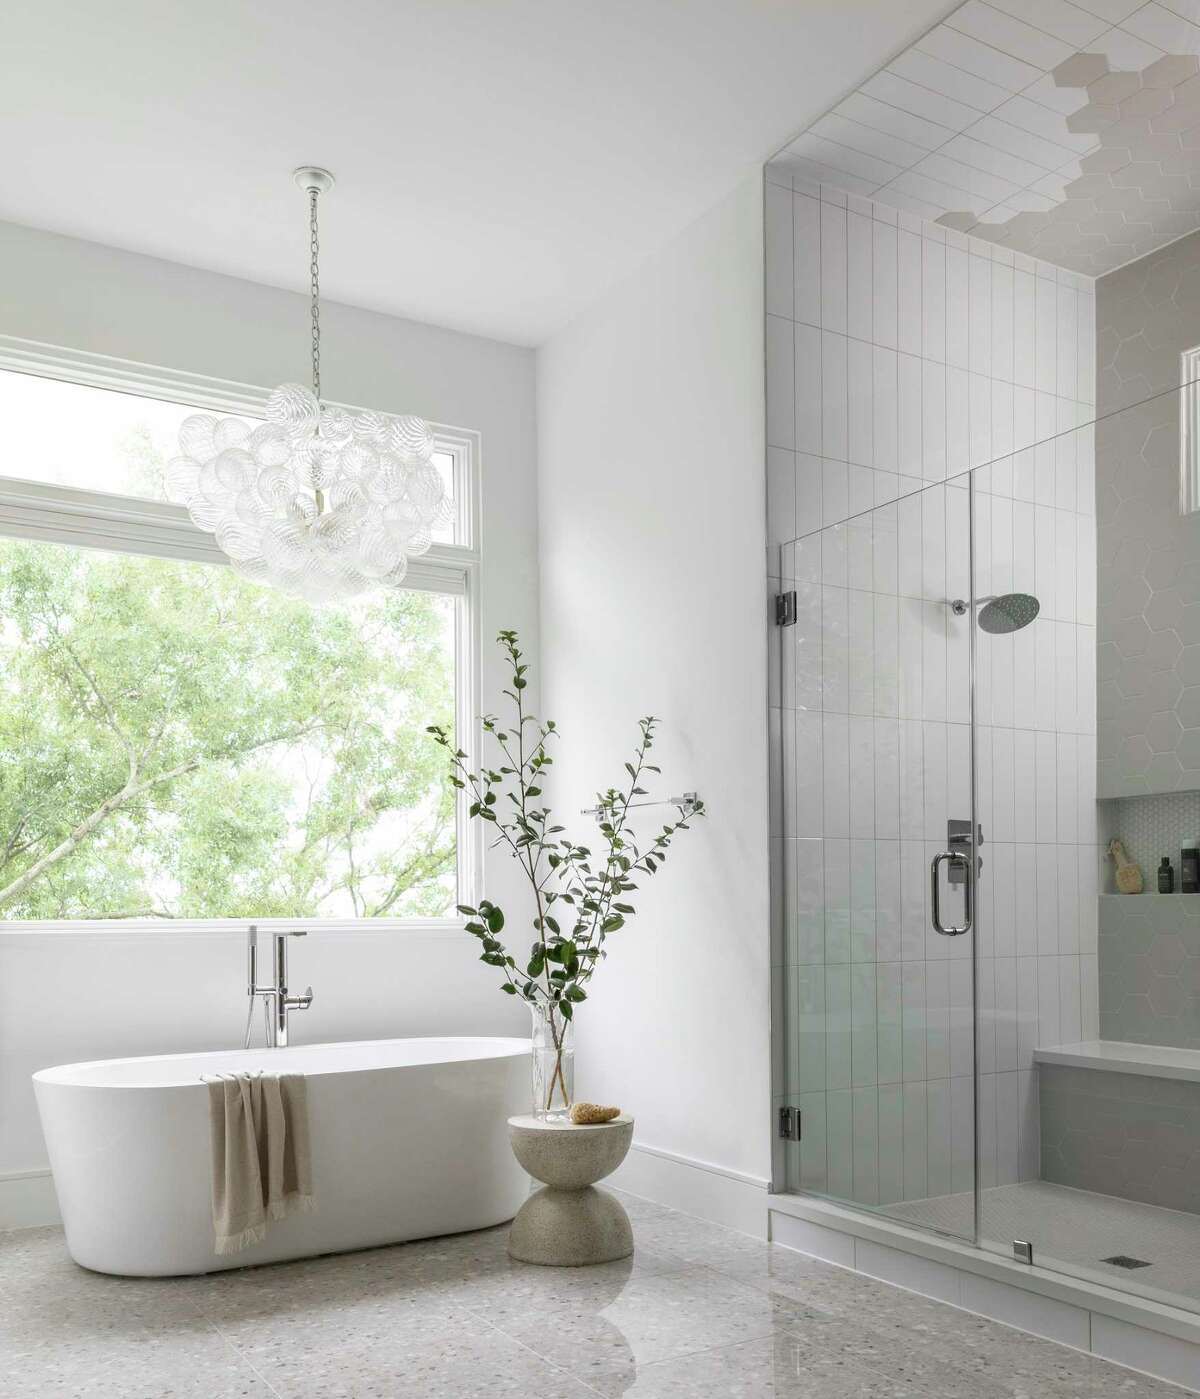 The primary bathroom's shower uses two types of tile, one for the side walls and part of the ceiling and the other for the floor, back wall and remainder of the ceiling.